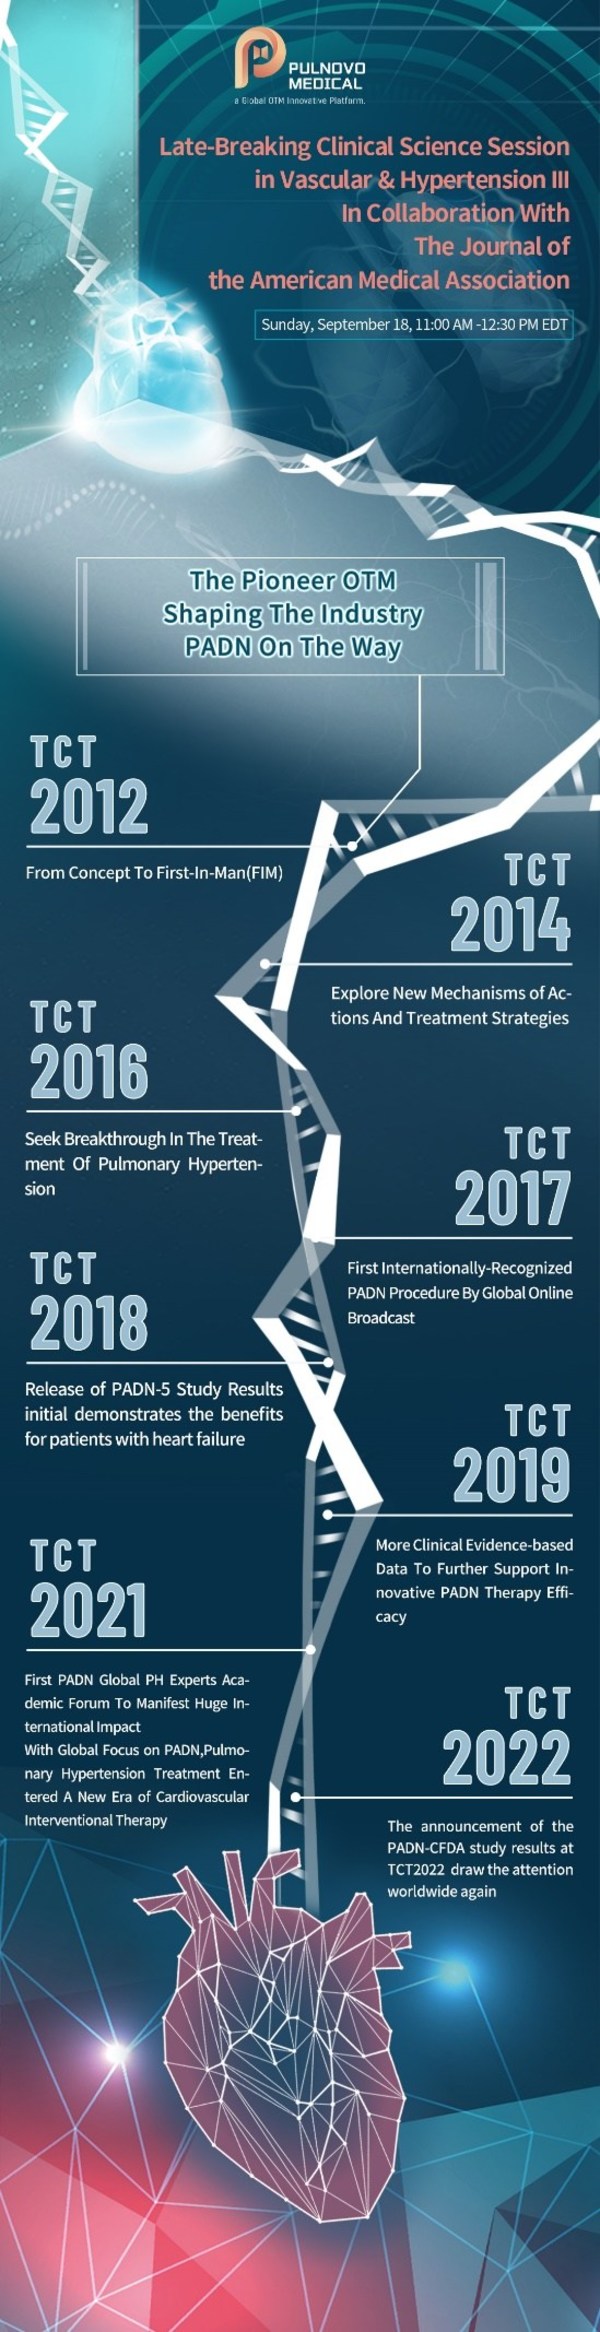 TCT2022| Pulnovo Medical Announced That The Latest Results Of PADN-CFDA Pivotal Trial Indicate Effectiveness And Safety of PADN For The Treatment Of Pulmonary Arterial Hypertension (PAH)